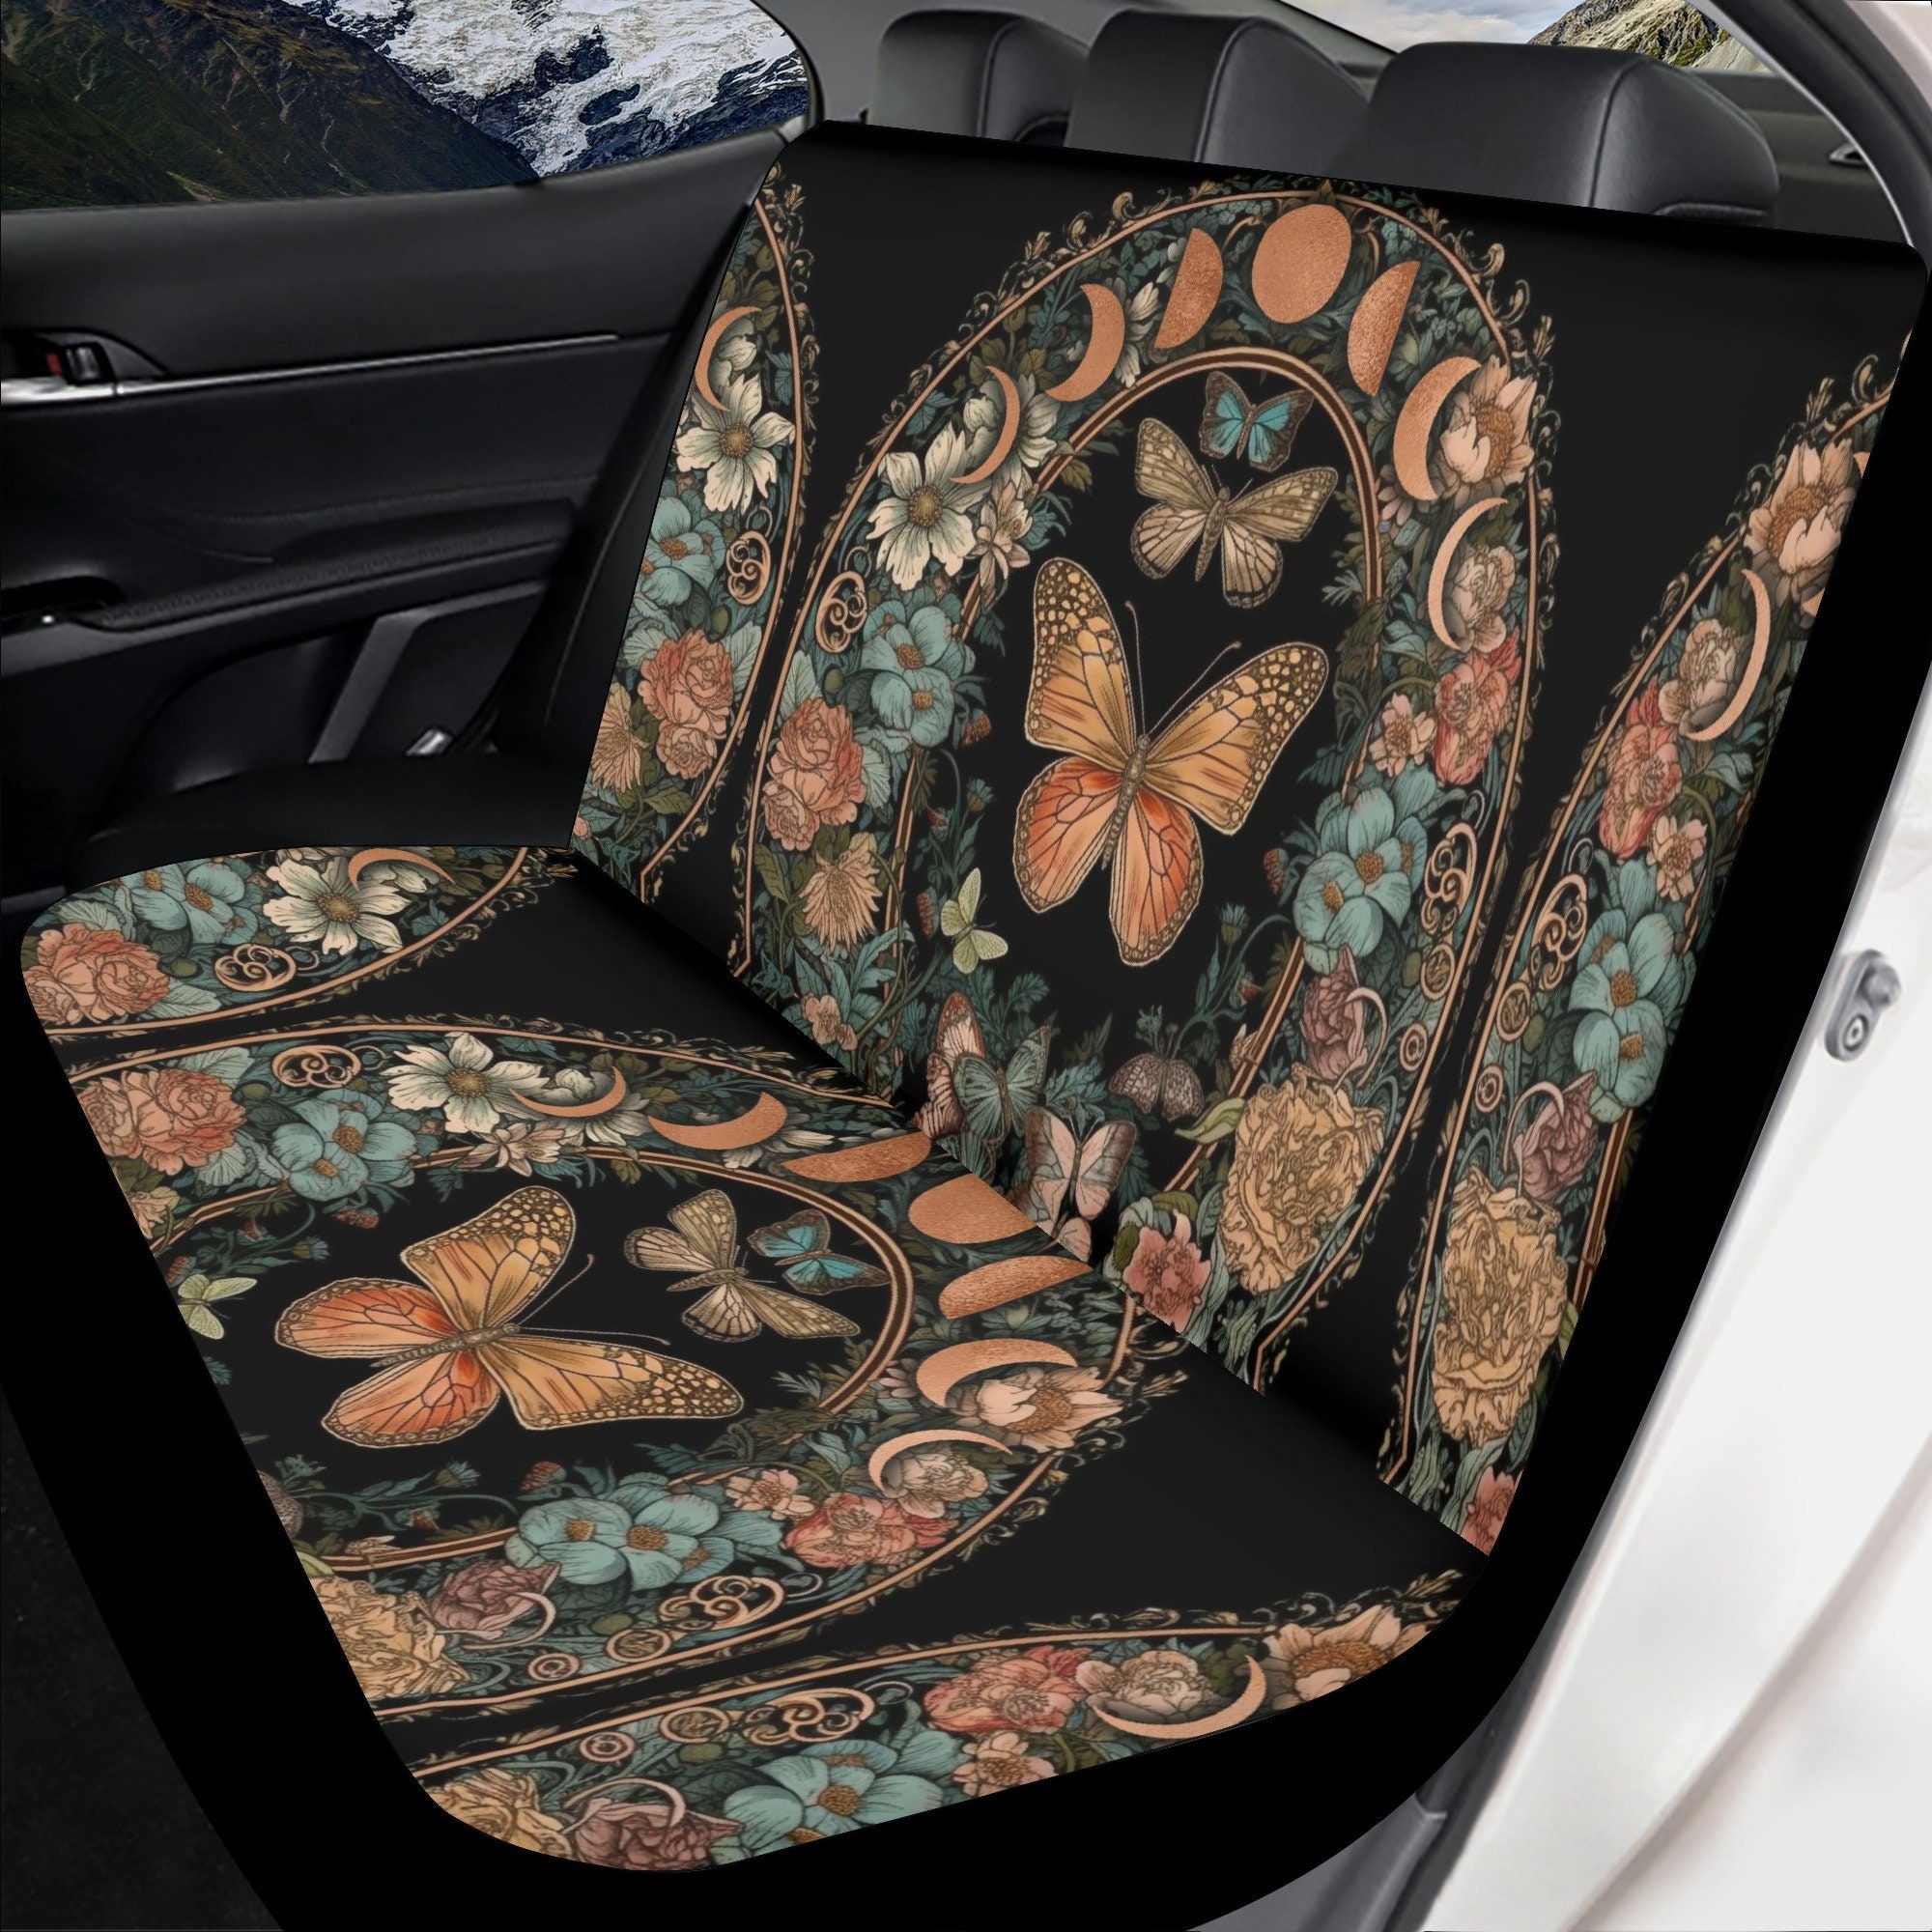 Discover Boho red moon wildflower daisy moth Car Seat Cover Set, Witchy gypsy, Whimsical Car interior decor, car accessories